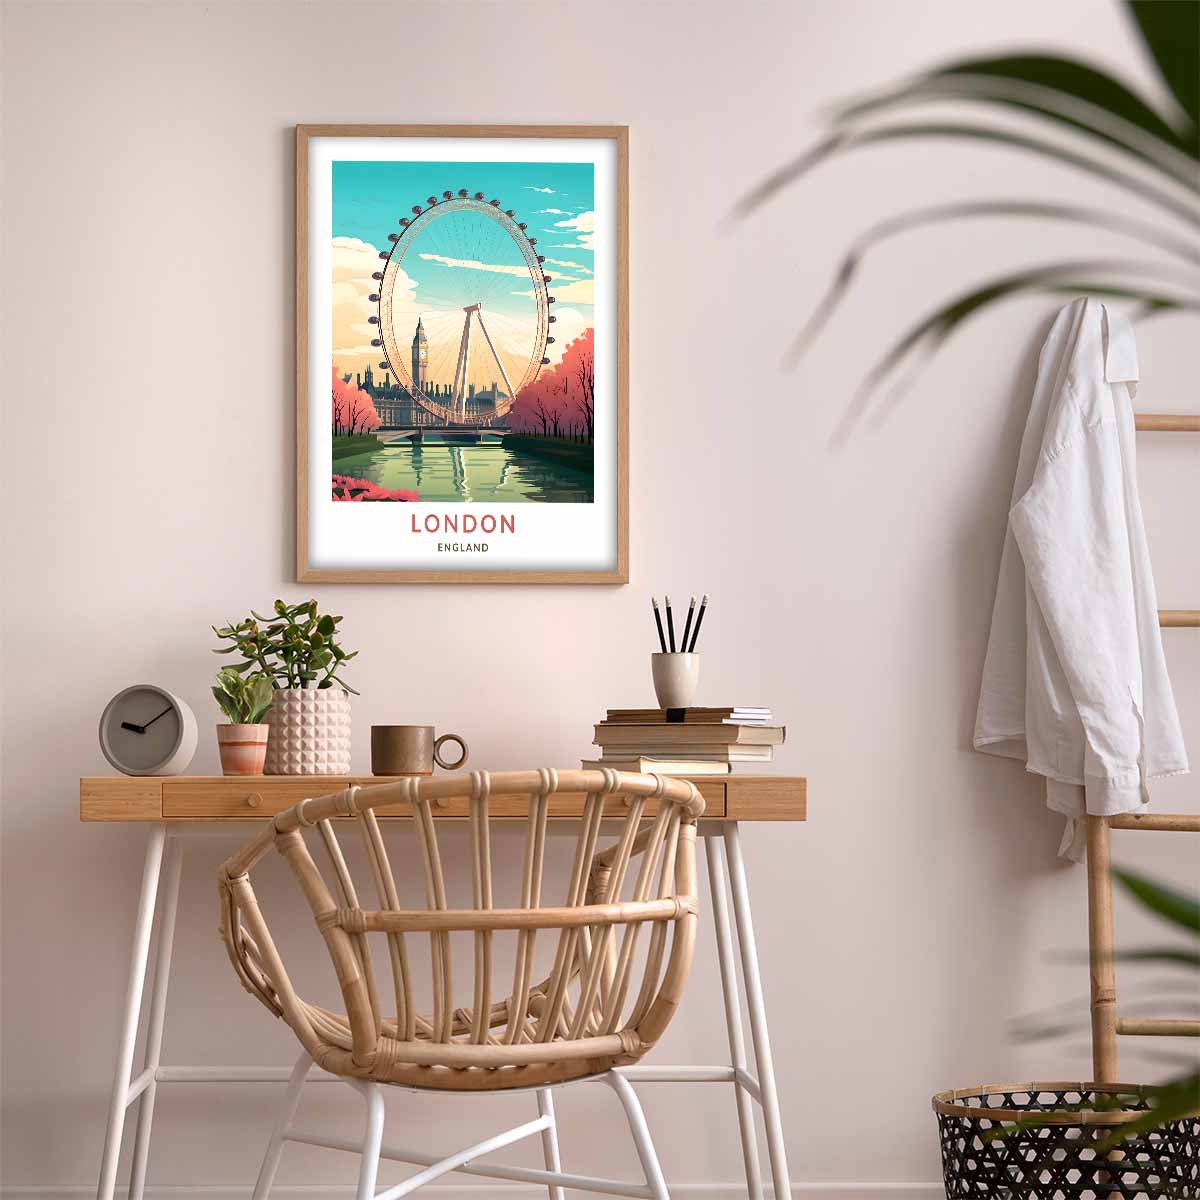 Captivating London Views Travel Poster Prints for Your Walls